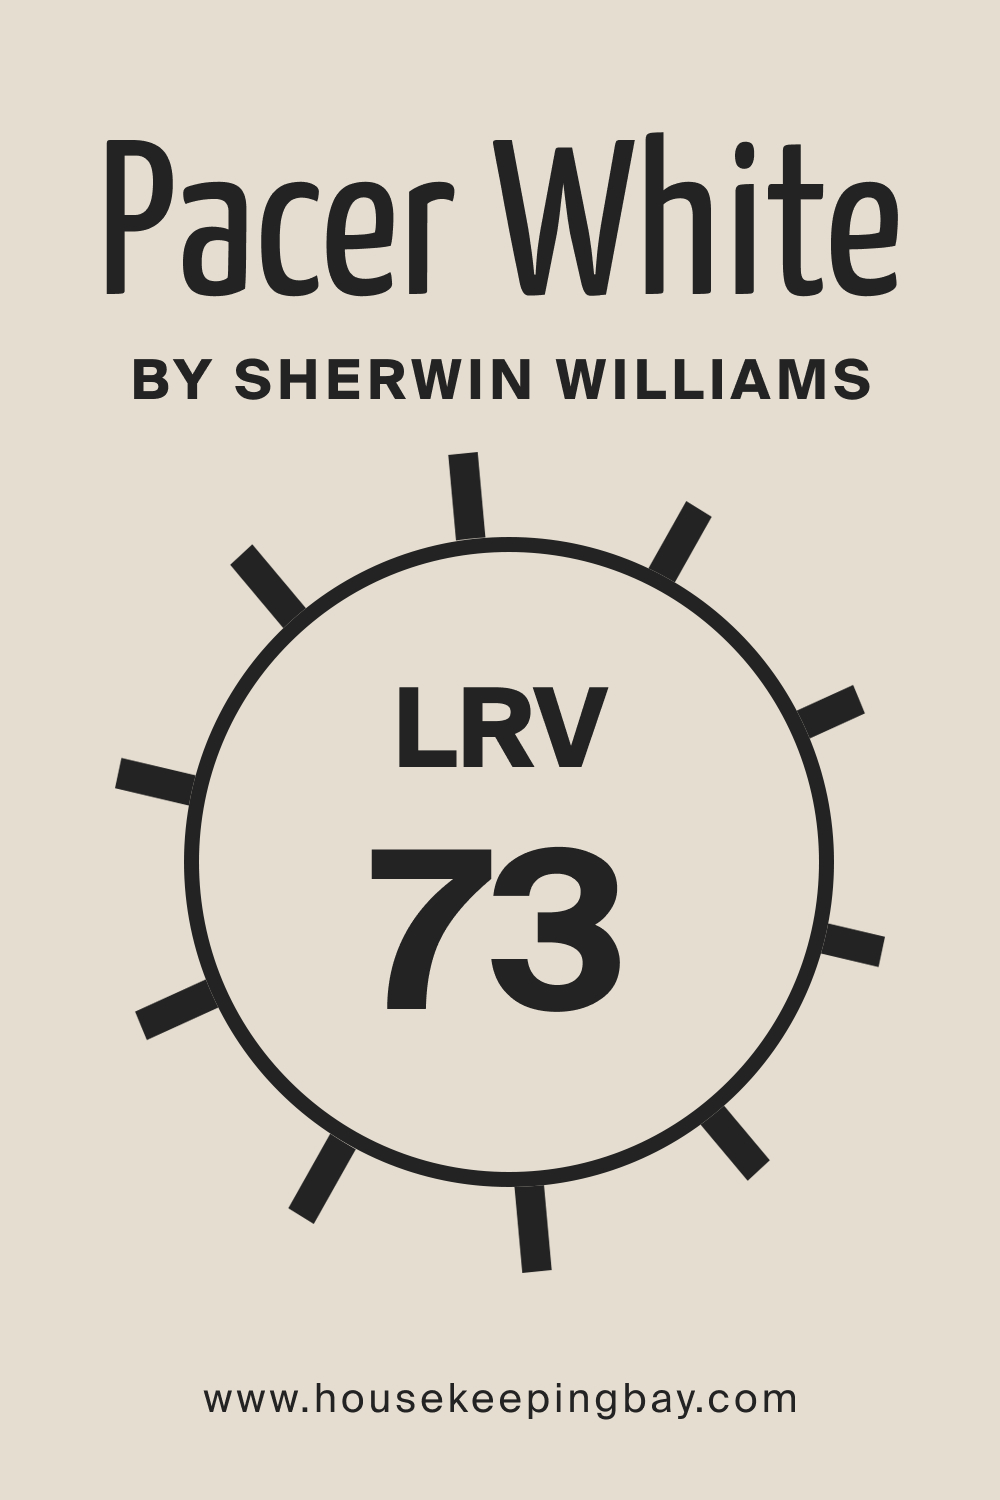 SW Pacer White by Sherwin Williams. LRV – 73